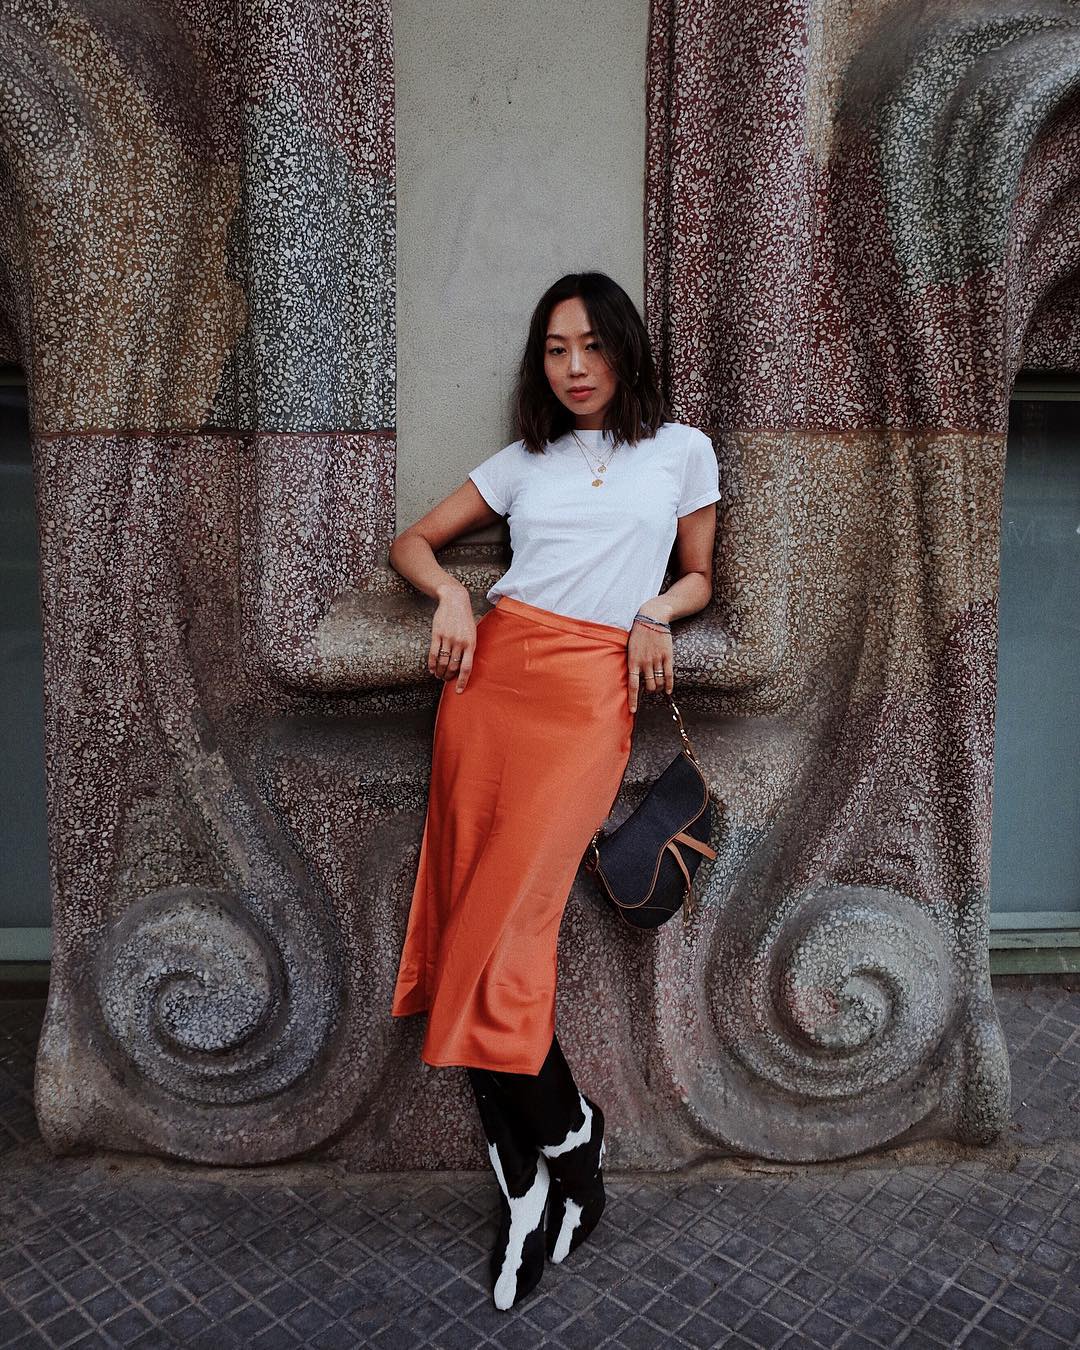 15 Skirt-and-T-shirt Outfits Fashion Girls Love | Who What Wear